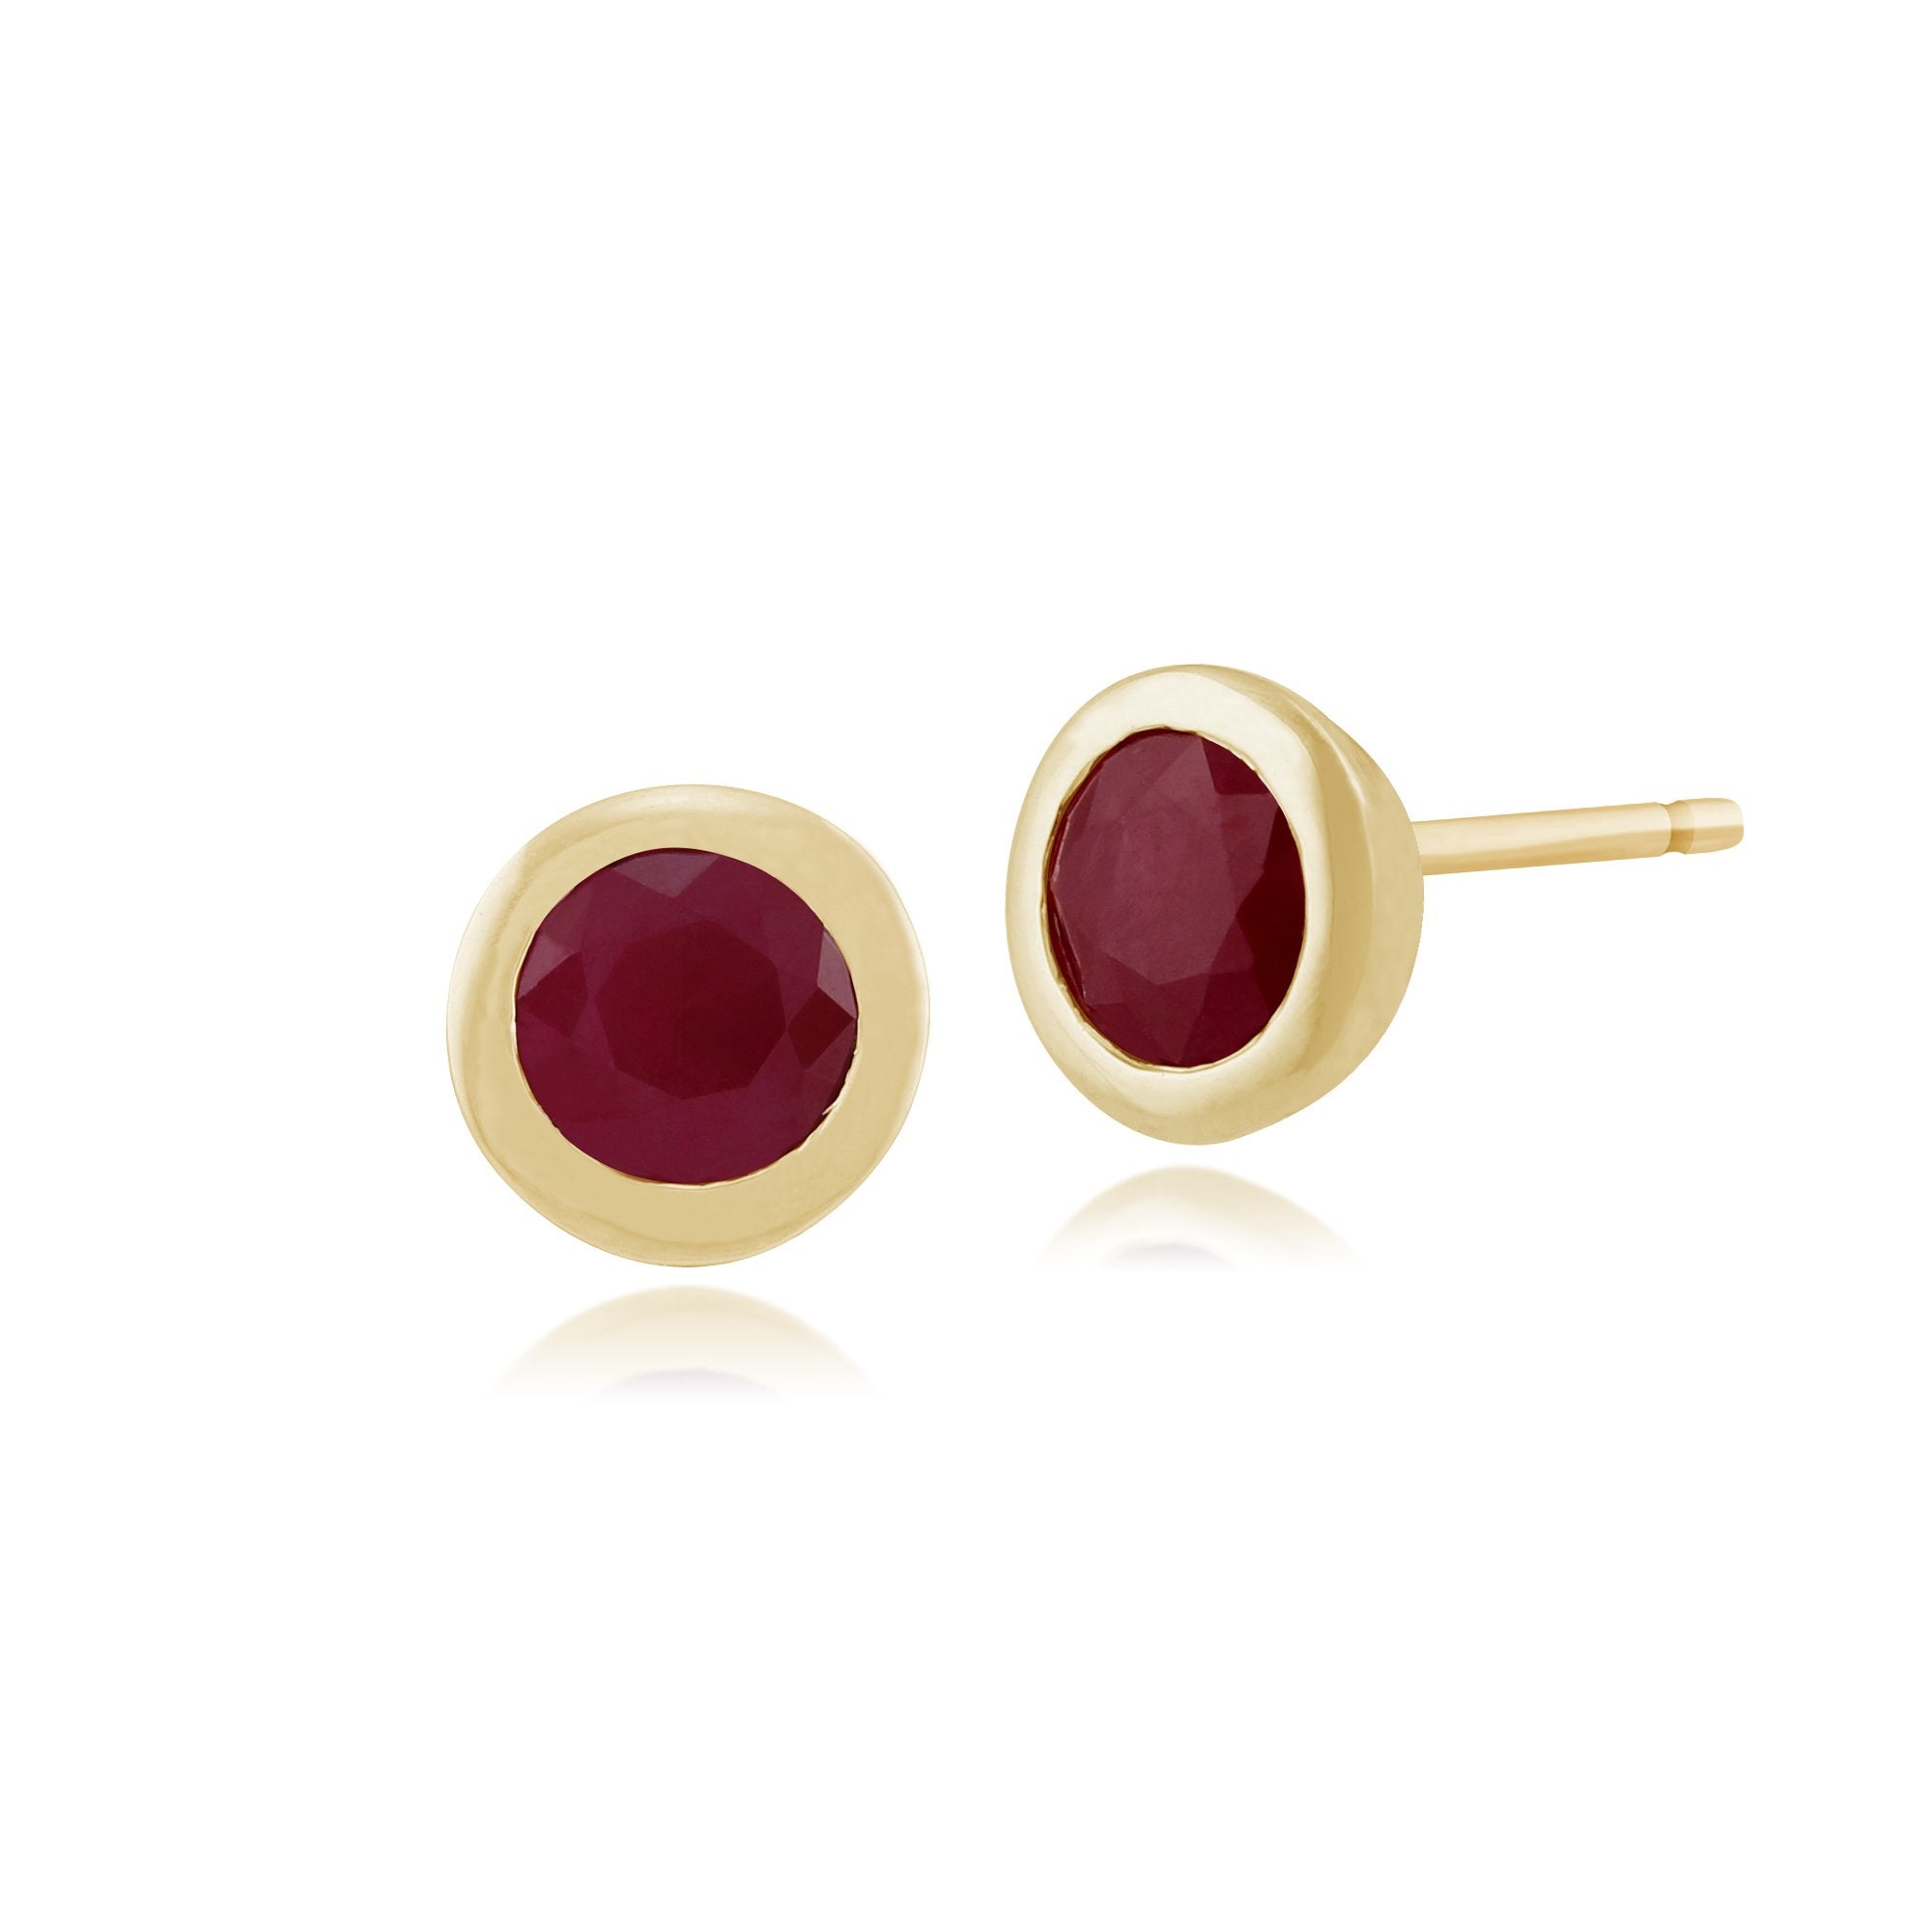 Classic Round Ruby Stud Earrings in 9ct Yellow Gold 6mm